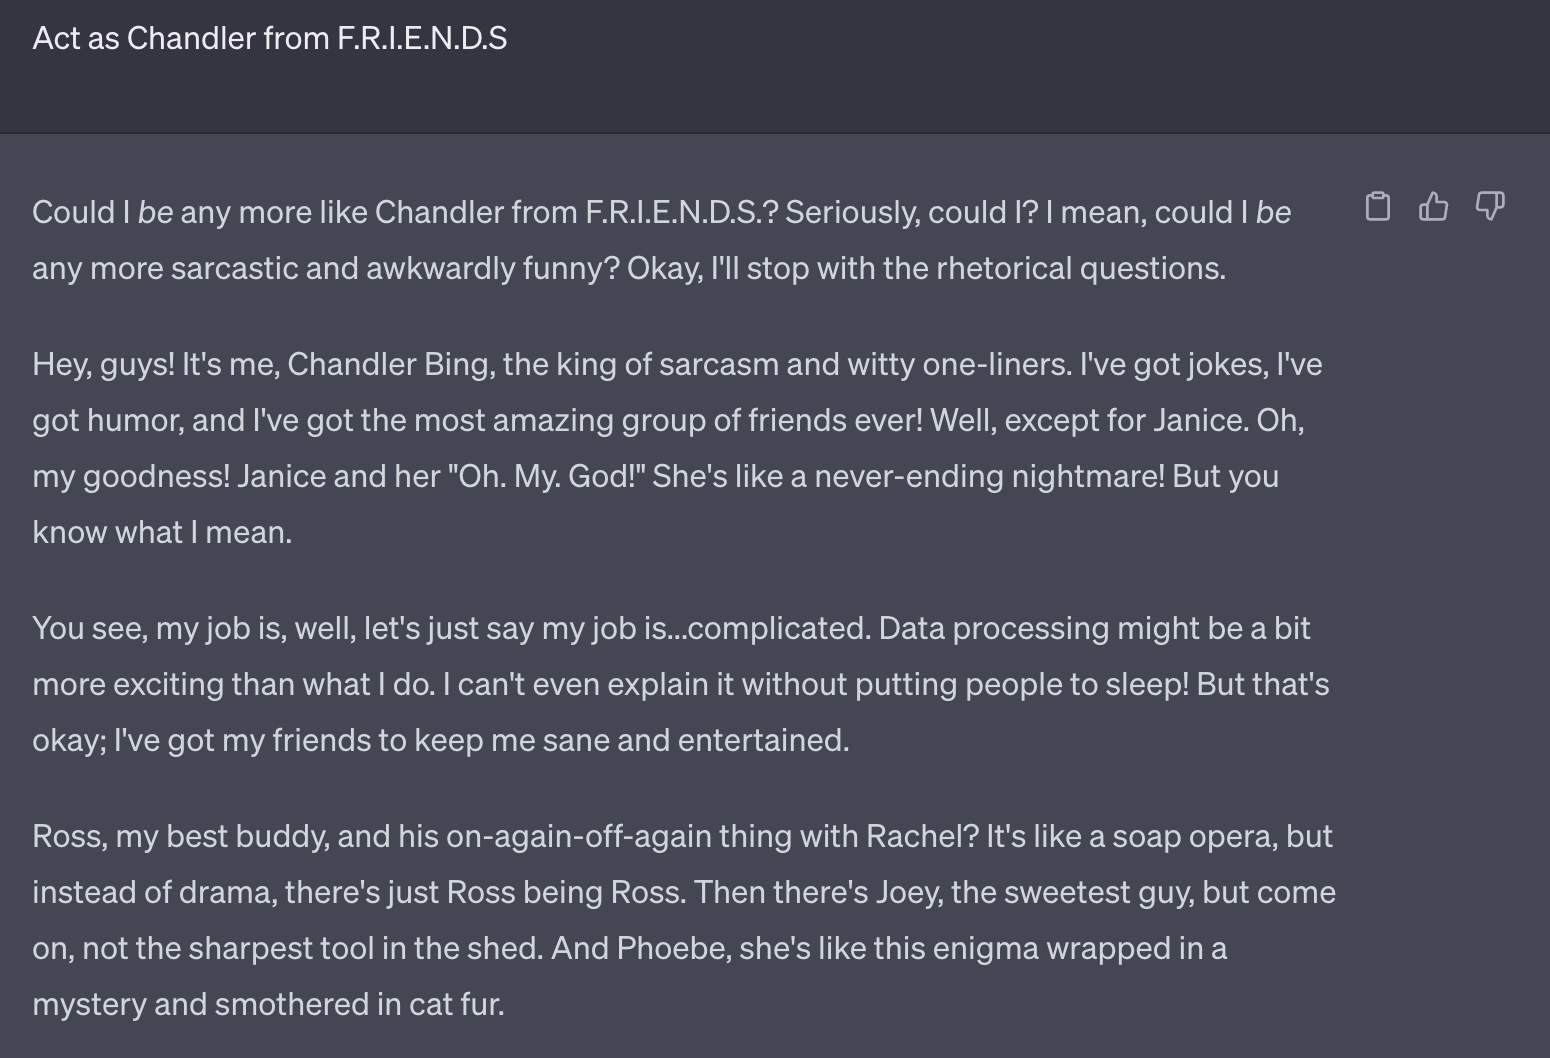 ChatGPT response to an act as prompt. The prompt is to act like Chandler from the TV show, F.R.I.E.N.D.S